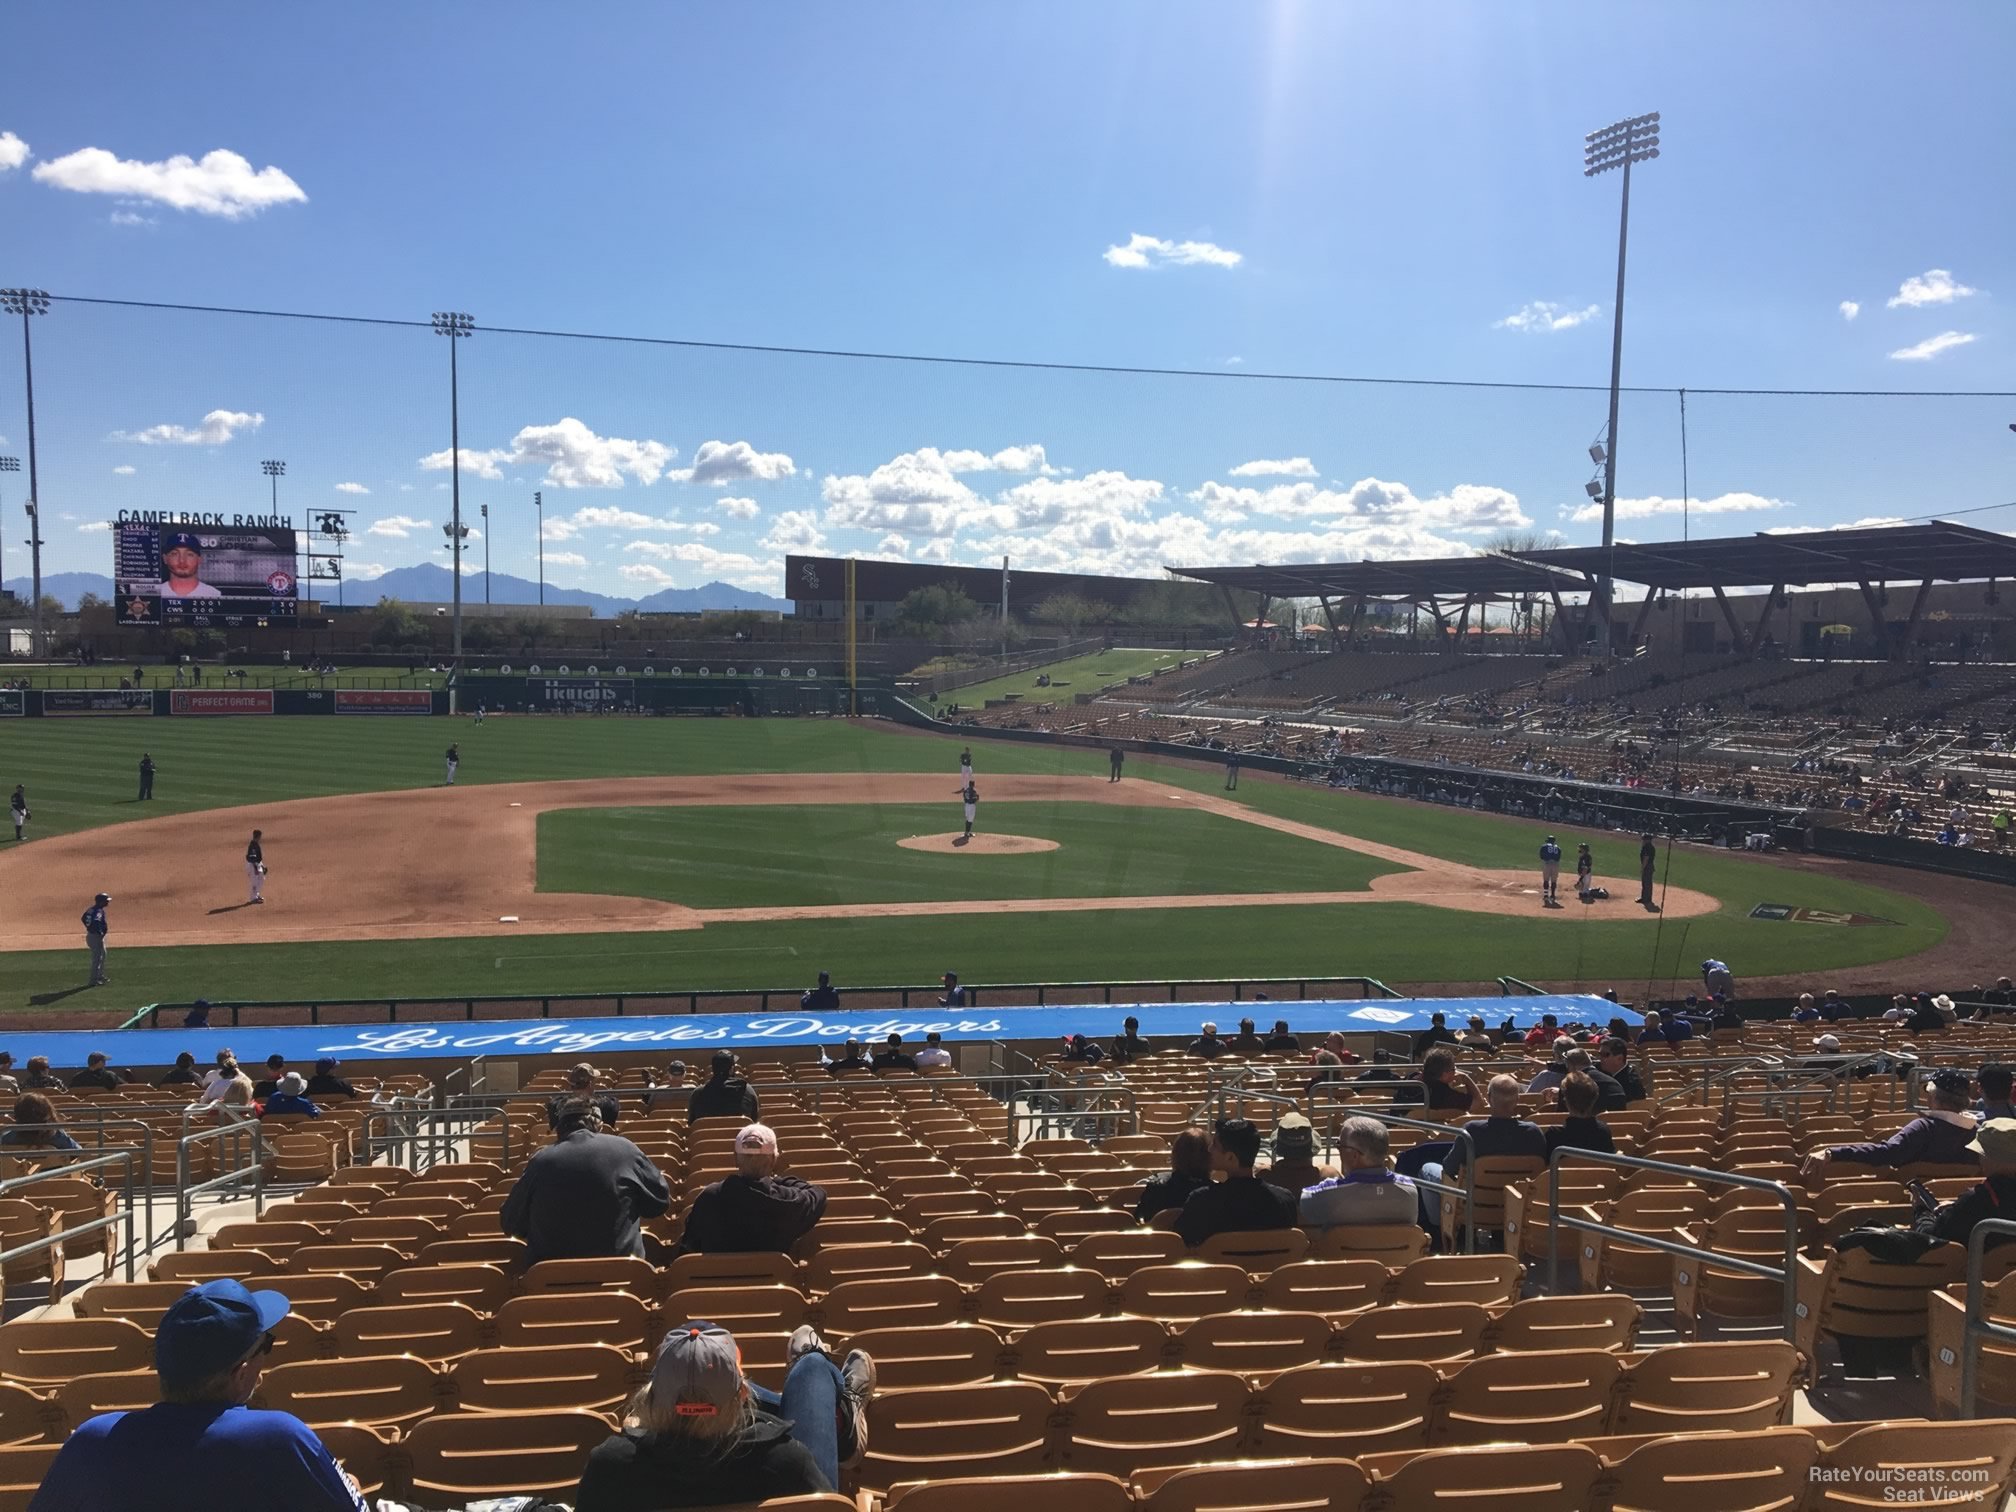 section 122, row 18 seat view  - camelback ranch